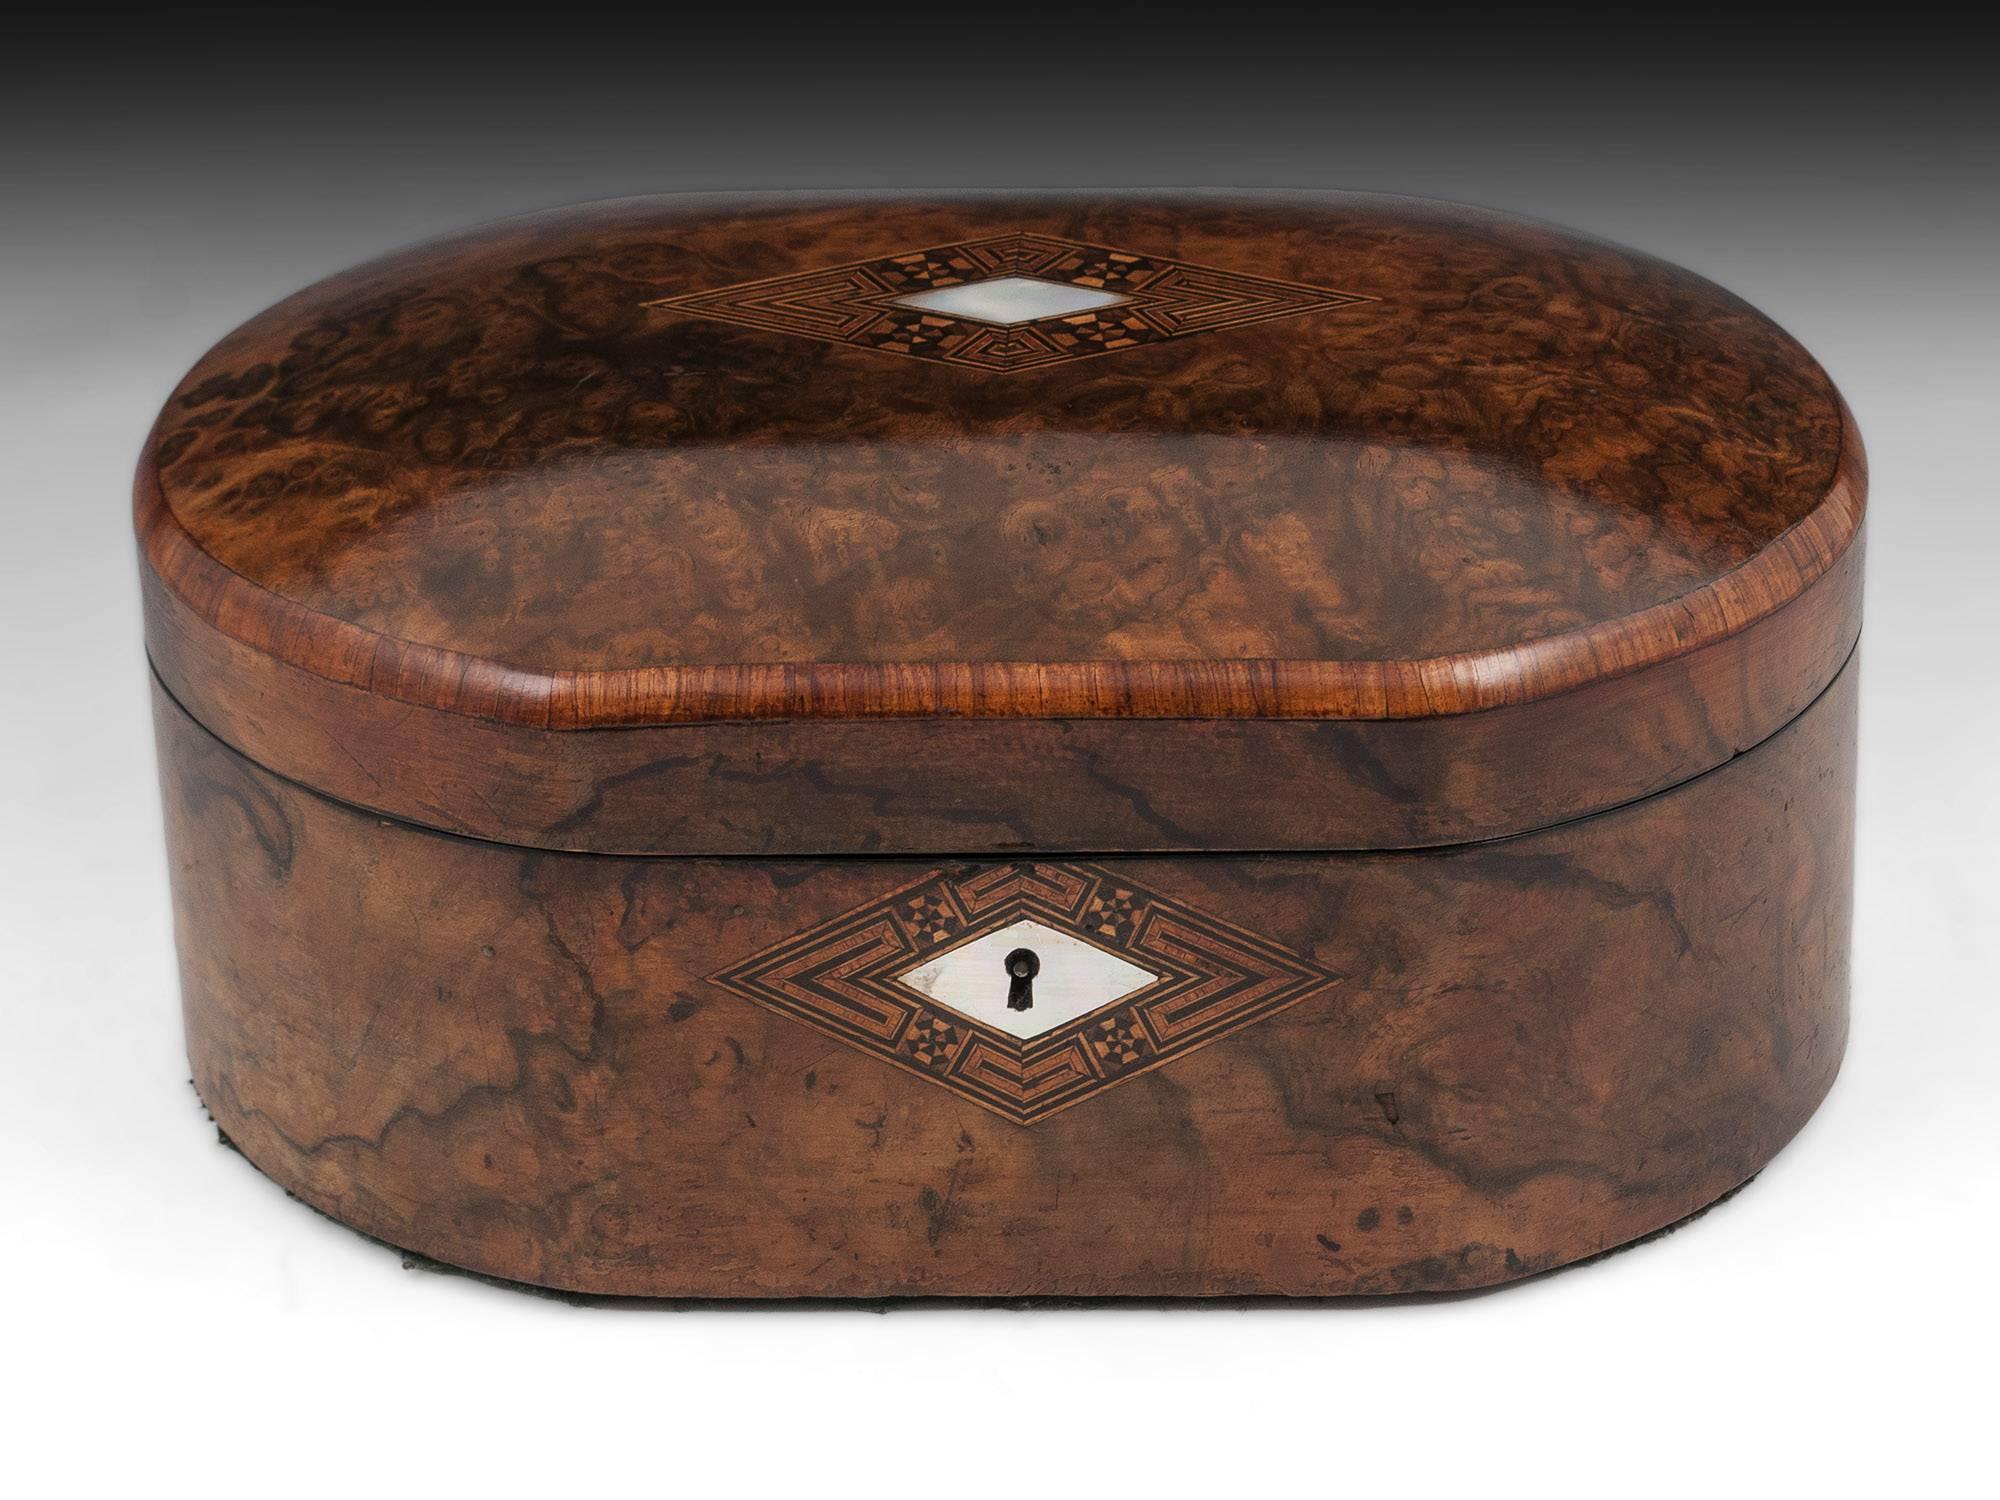 Antique Figured Walnut Jewelry Box with mother of pearl escutcheon and initial plate with tunbridge style borders. The box is edged in crossbanded tulipwood. 

The interior is lined in maroon padded velvet and silk paper. 

This jewelry box does